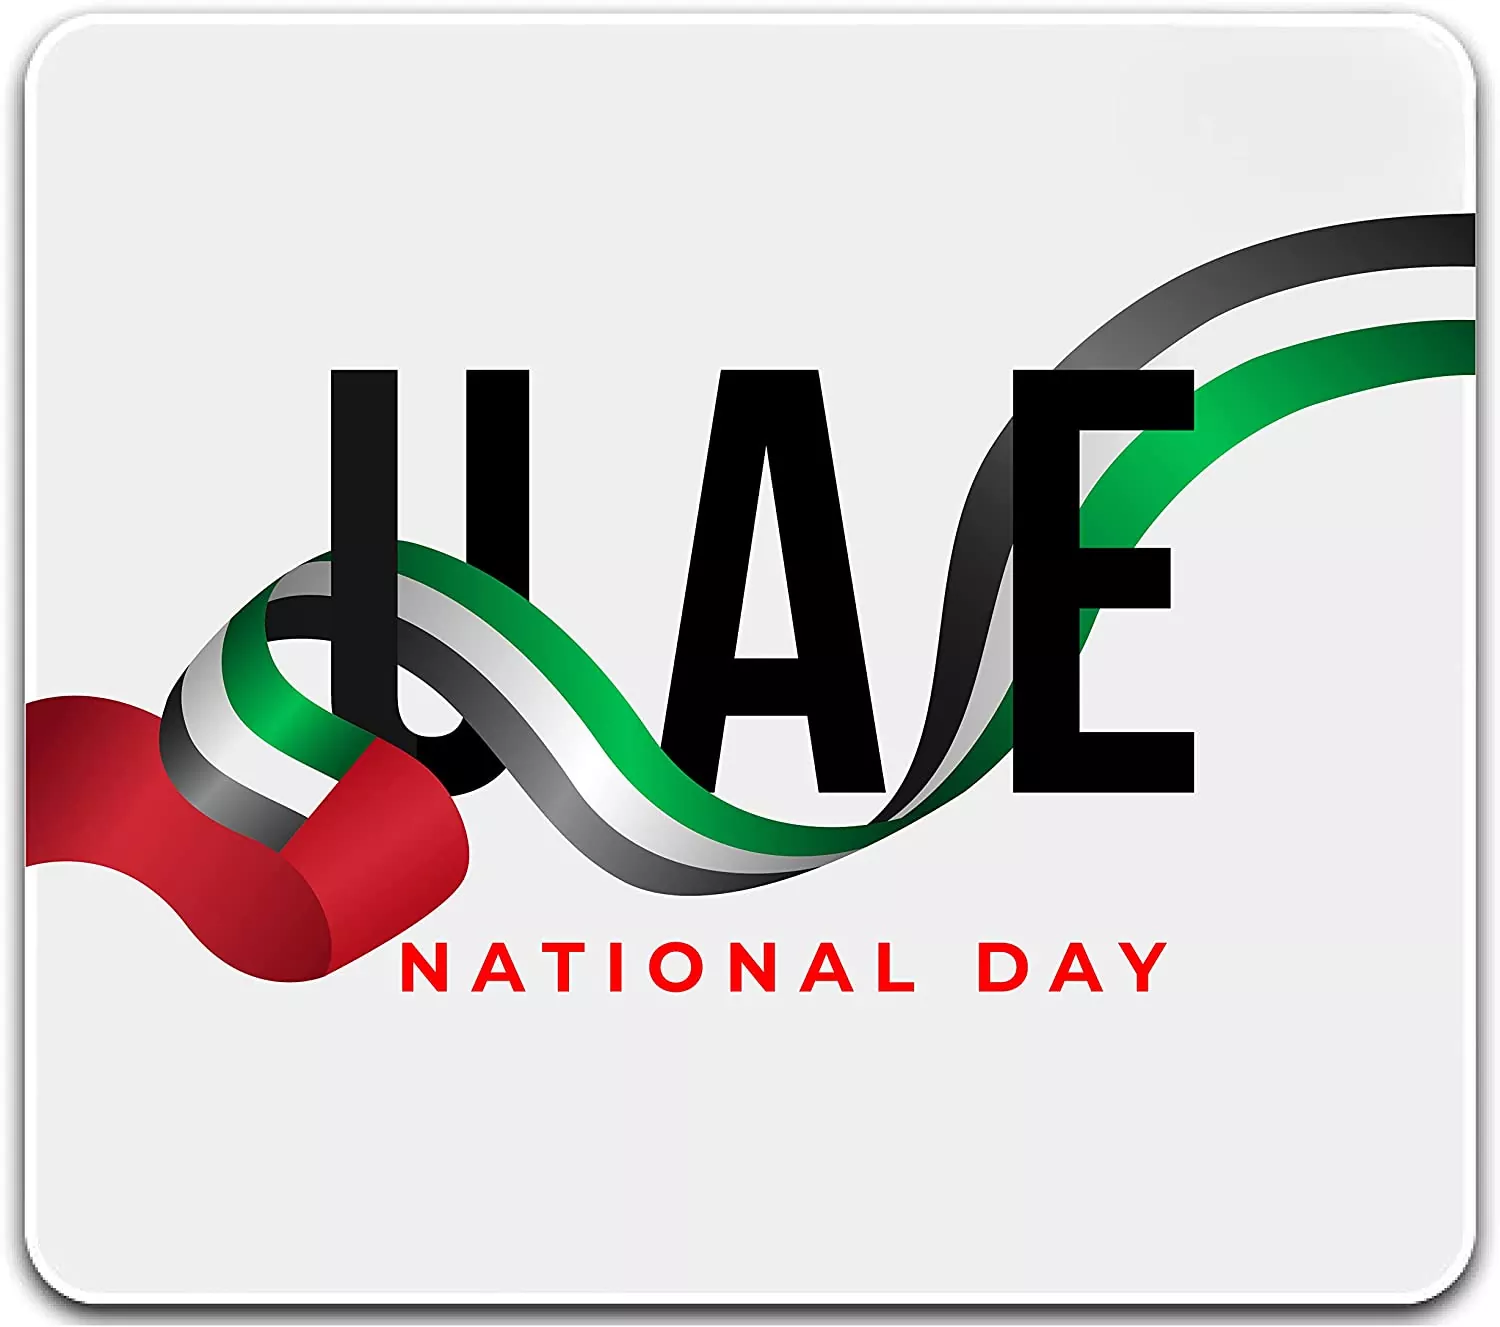 UAE NATIONAL DAY MOUSE PAD (Design 5)